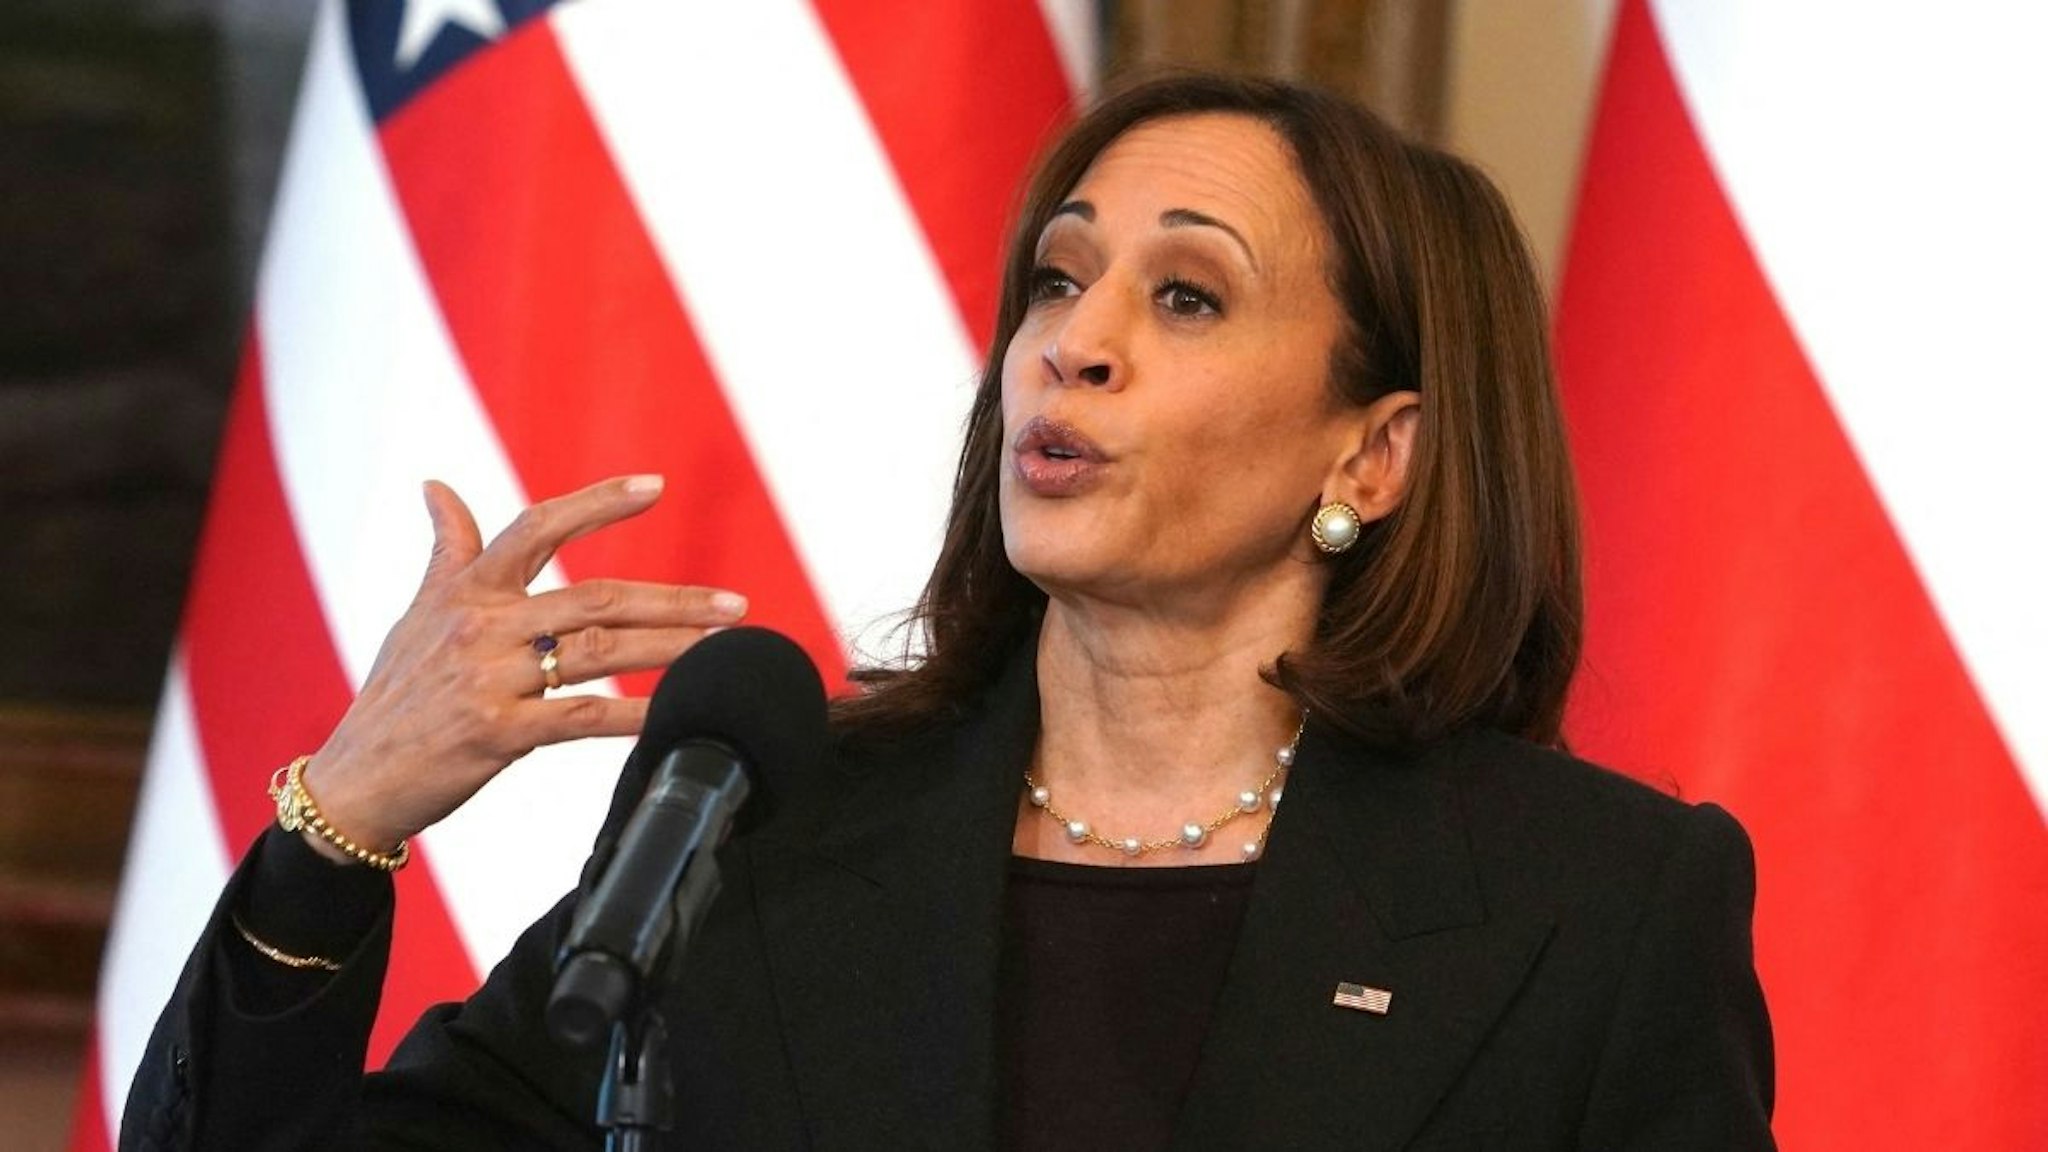 US Vice President Kamala Harris speaks during a press conference with the Polish President at Belwelder Palace in Warsaw, Poland, March 10, 2022.